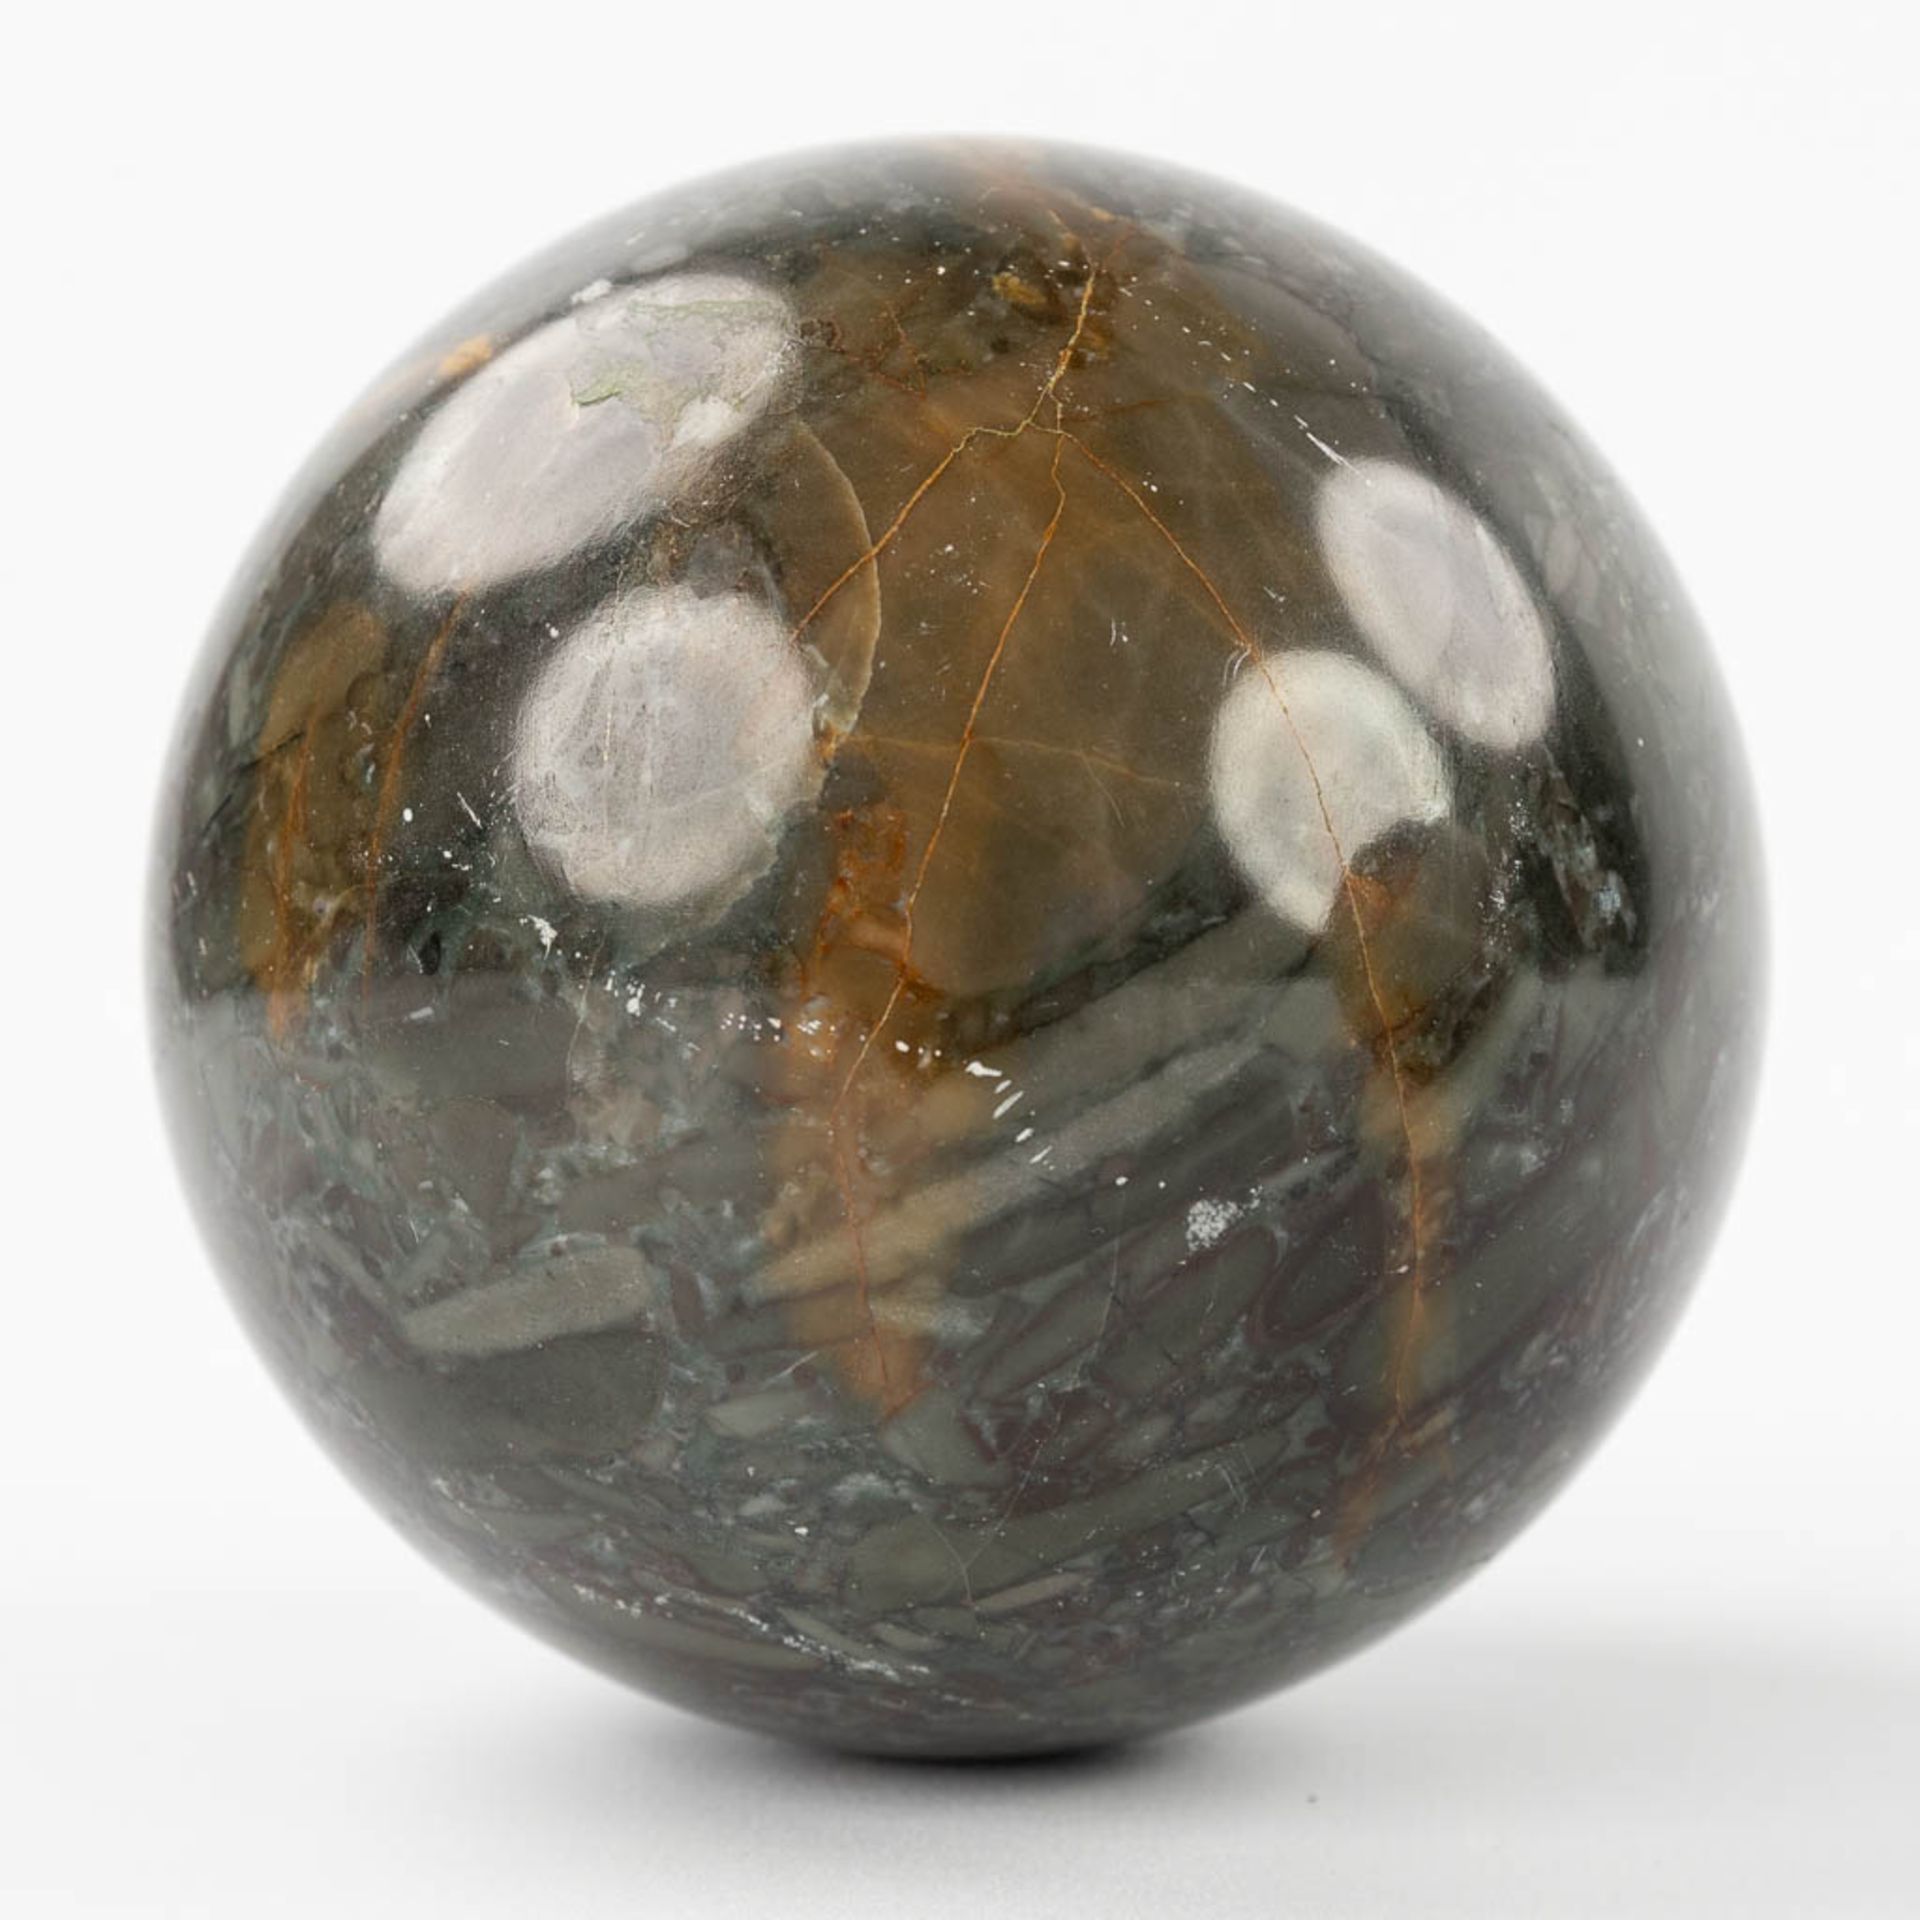 A set of 4 balls made of natural stone and marble. 20th century. (D: 9 cm) - Image 5 of 8